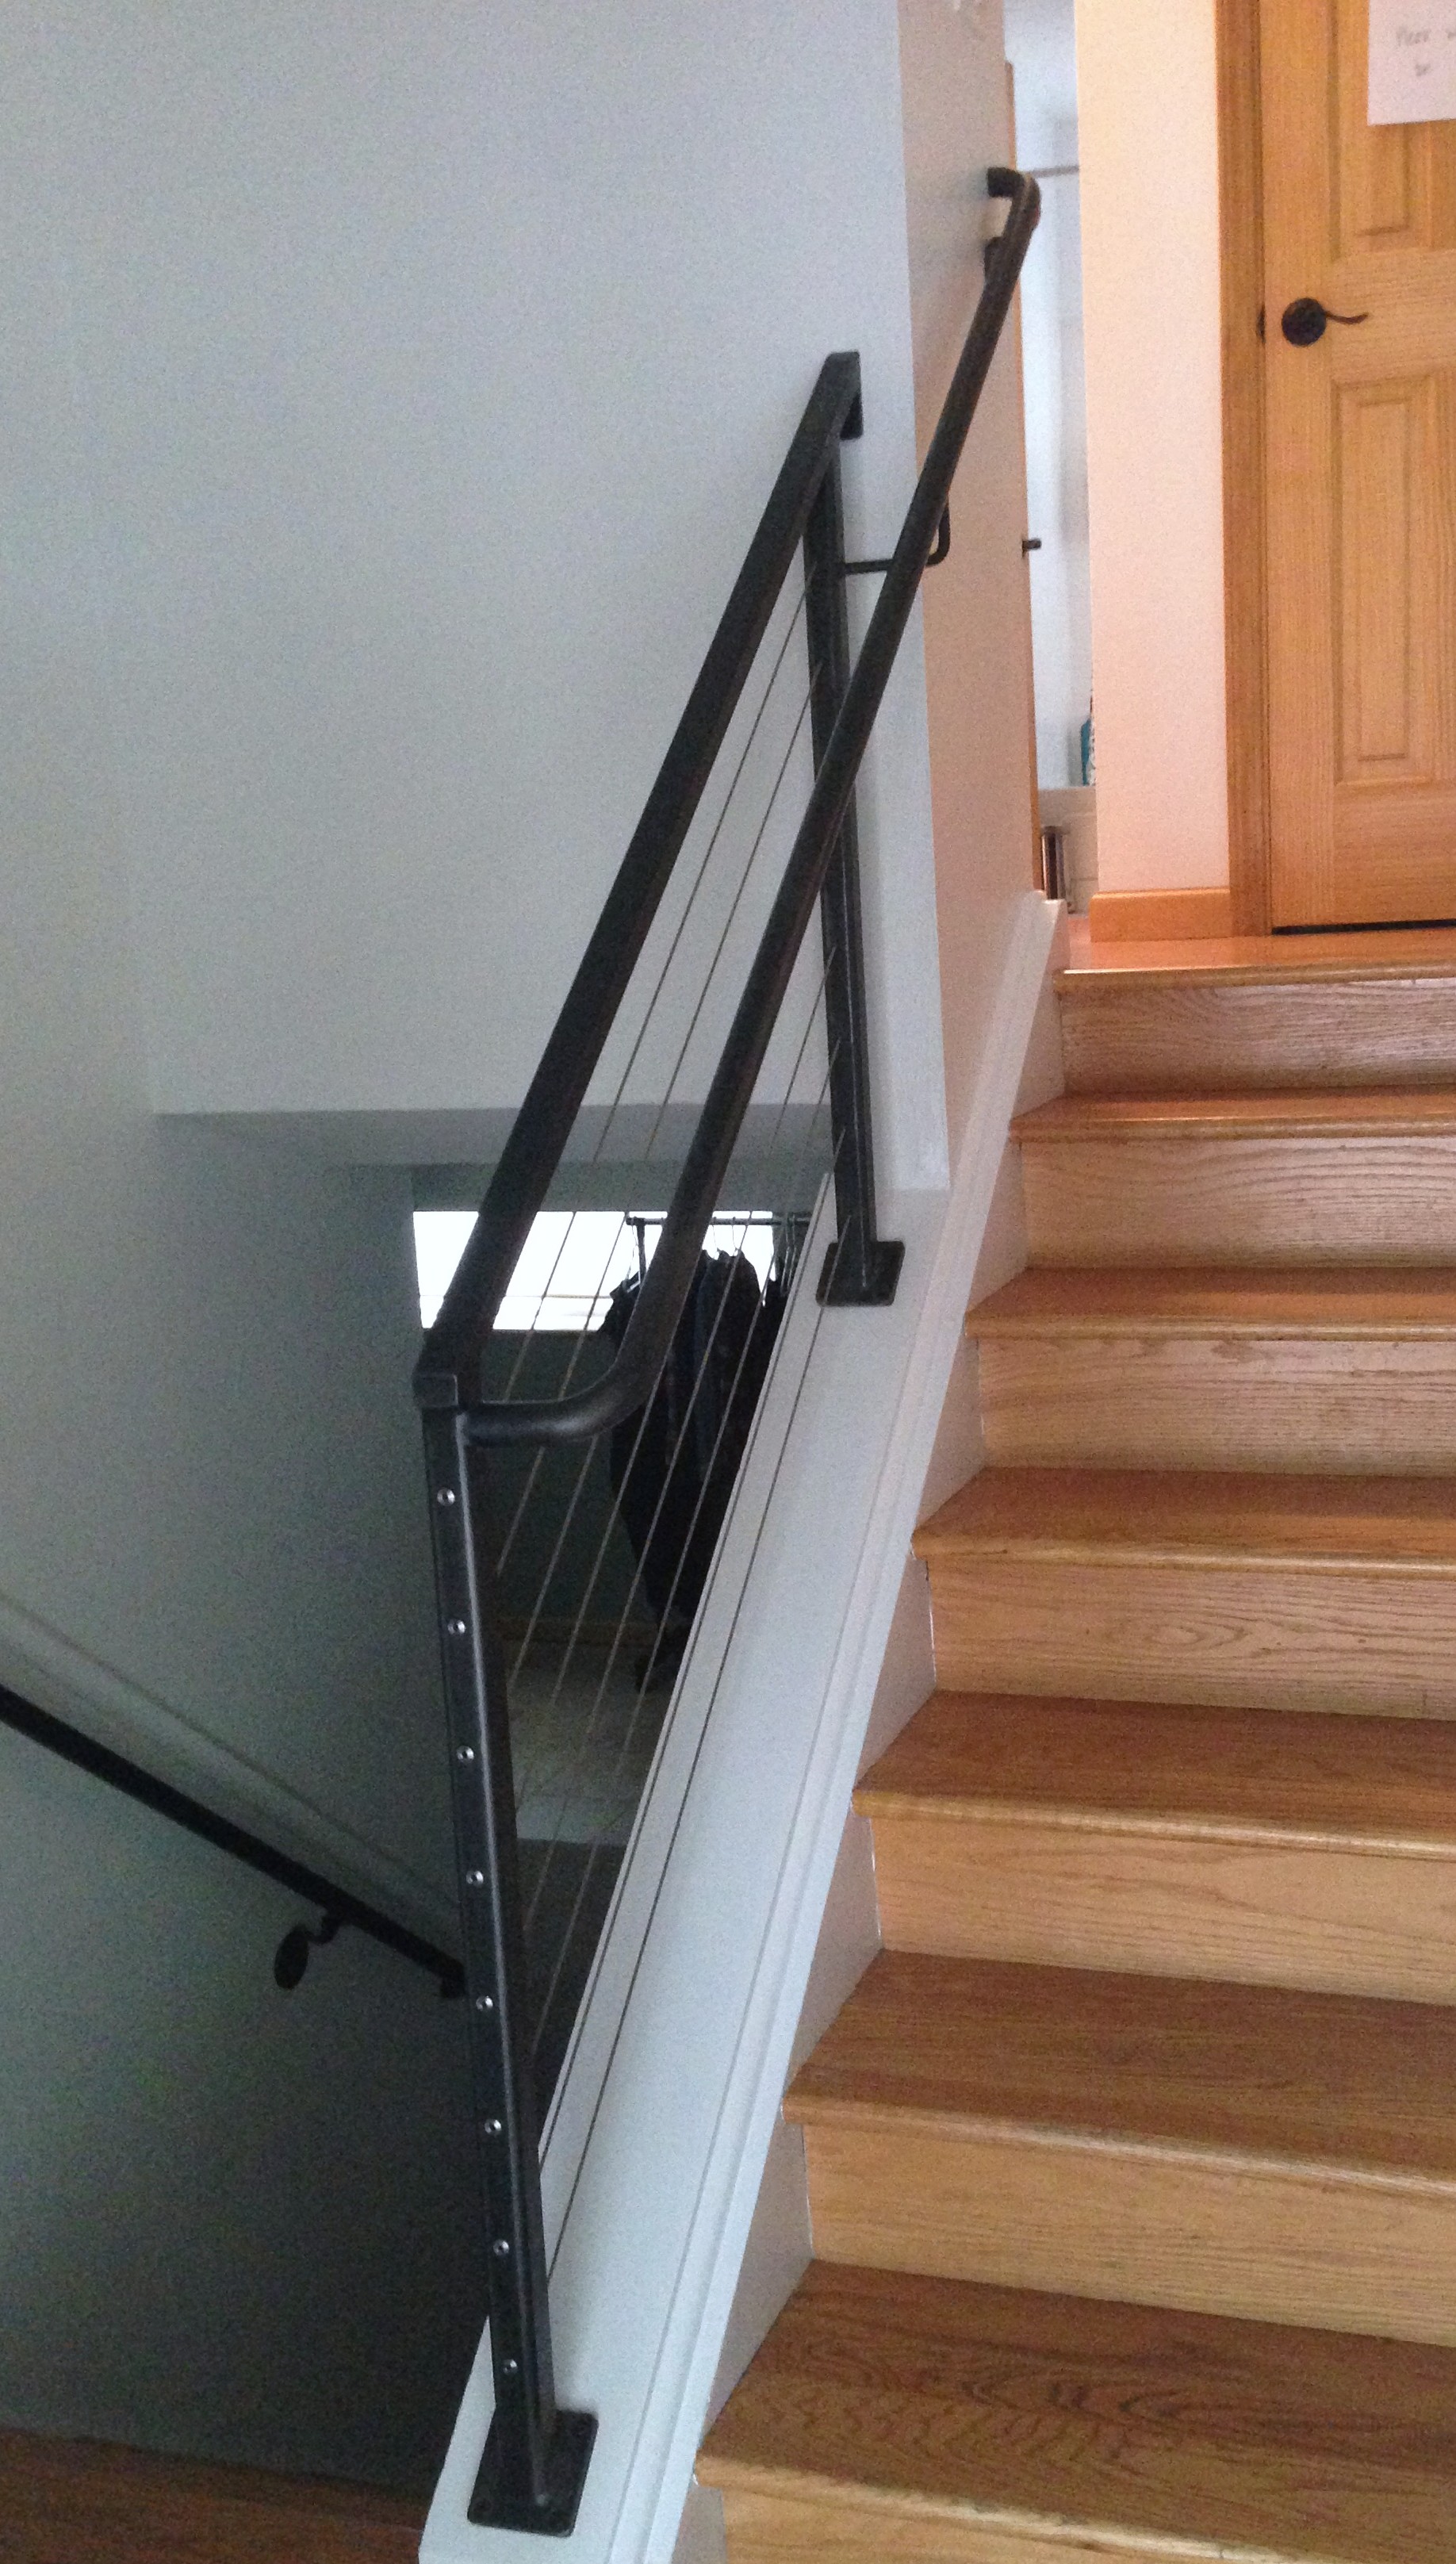 Classically Simple Cable Railing with Handrail